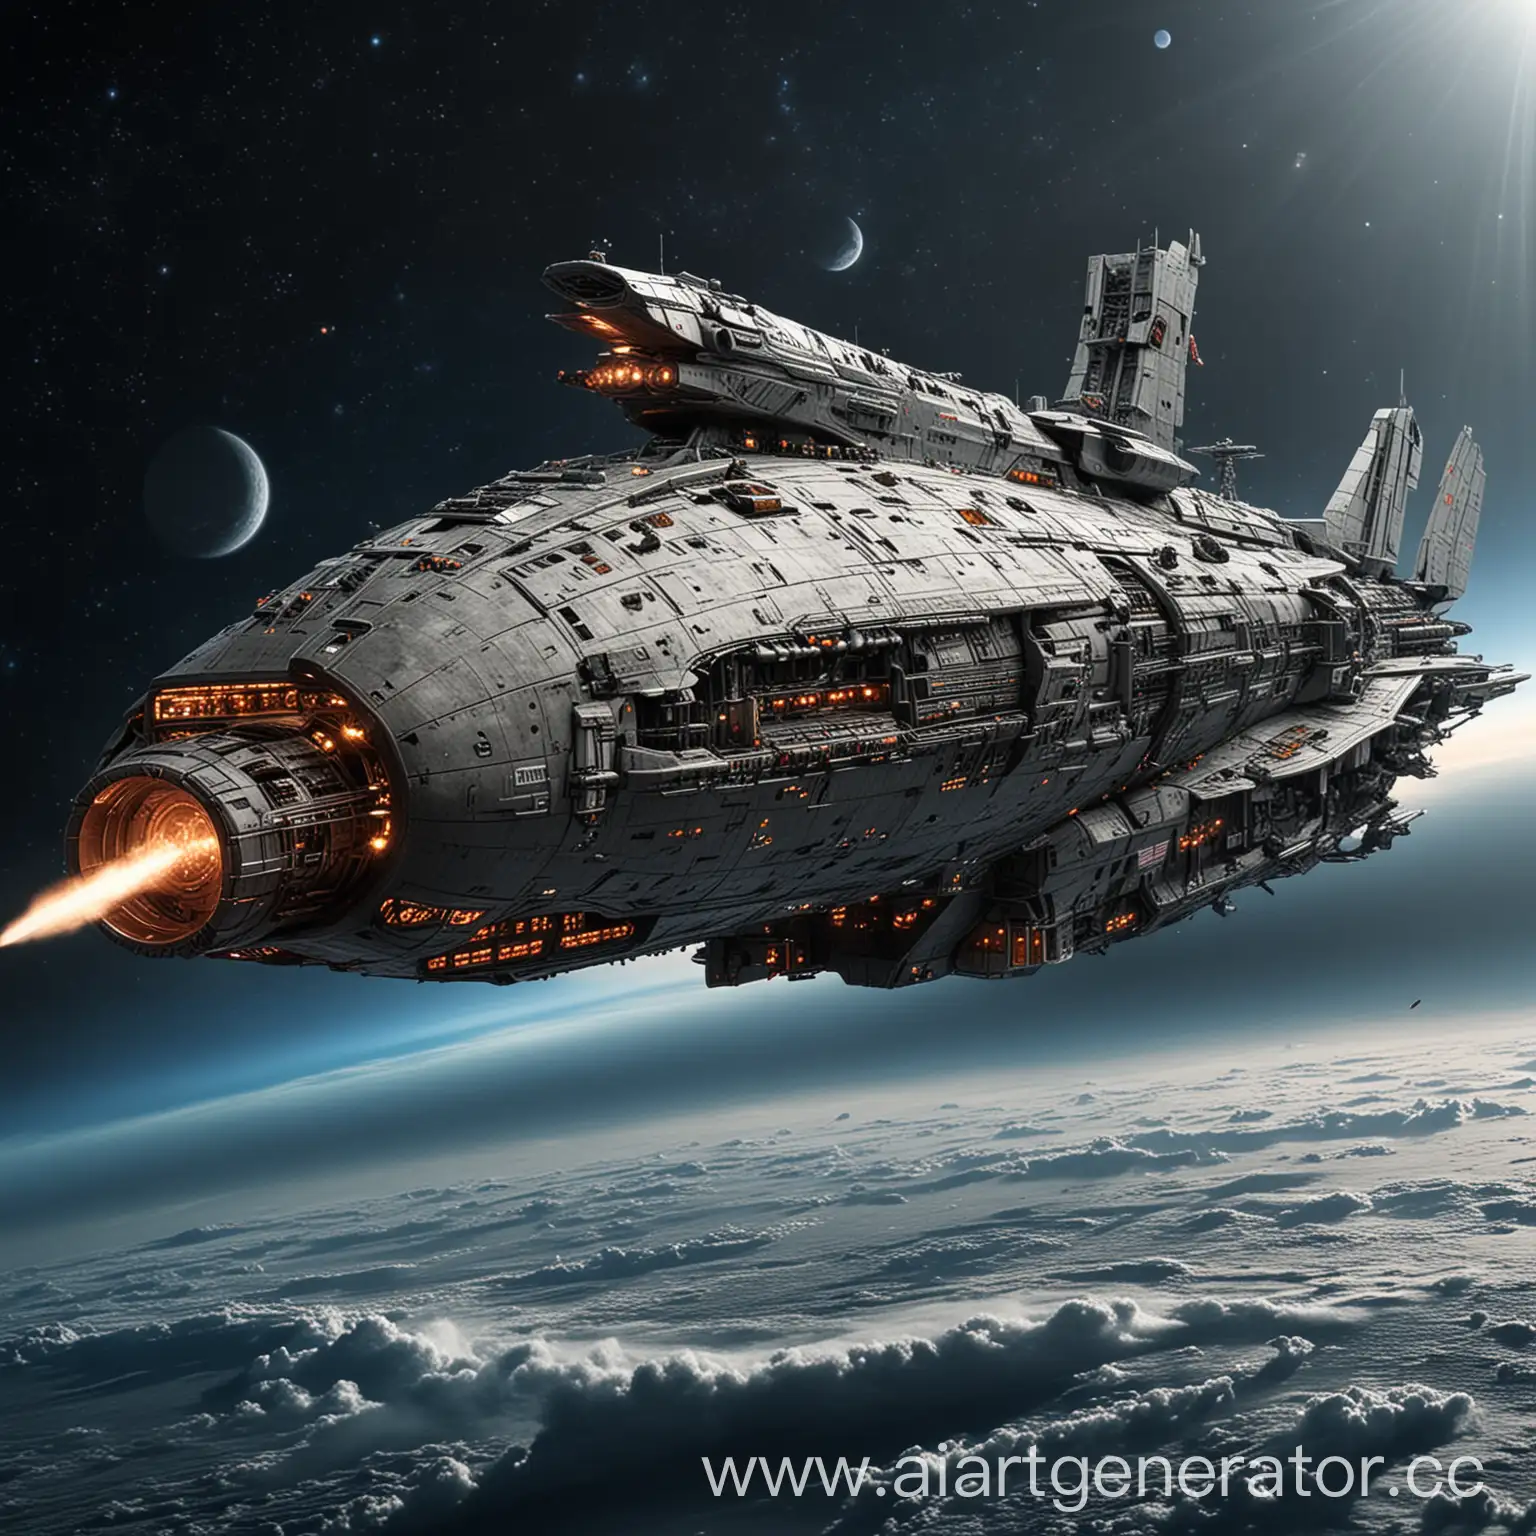 big battleship space ship(that can be real)
